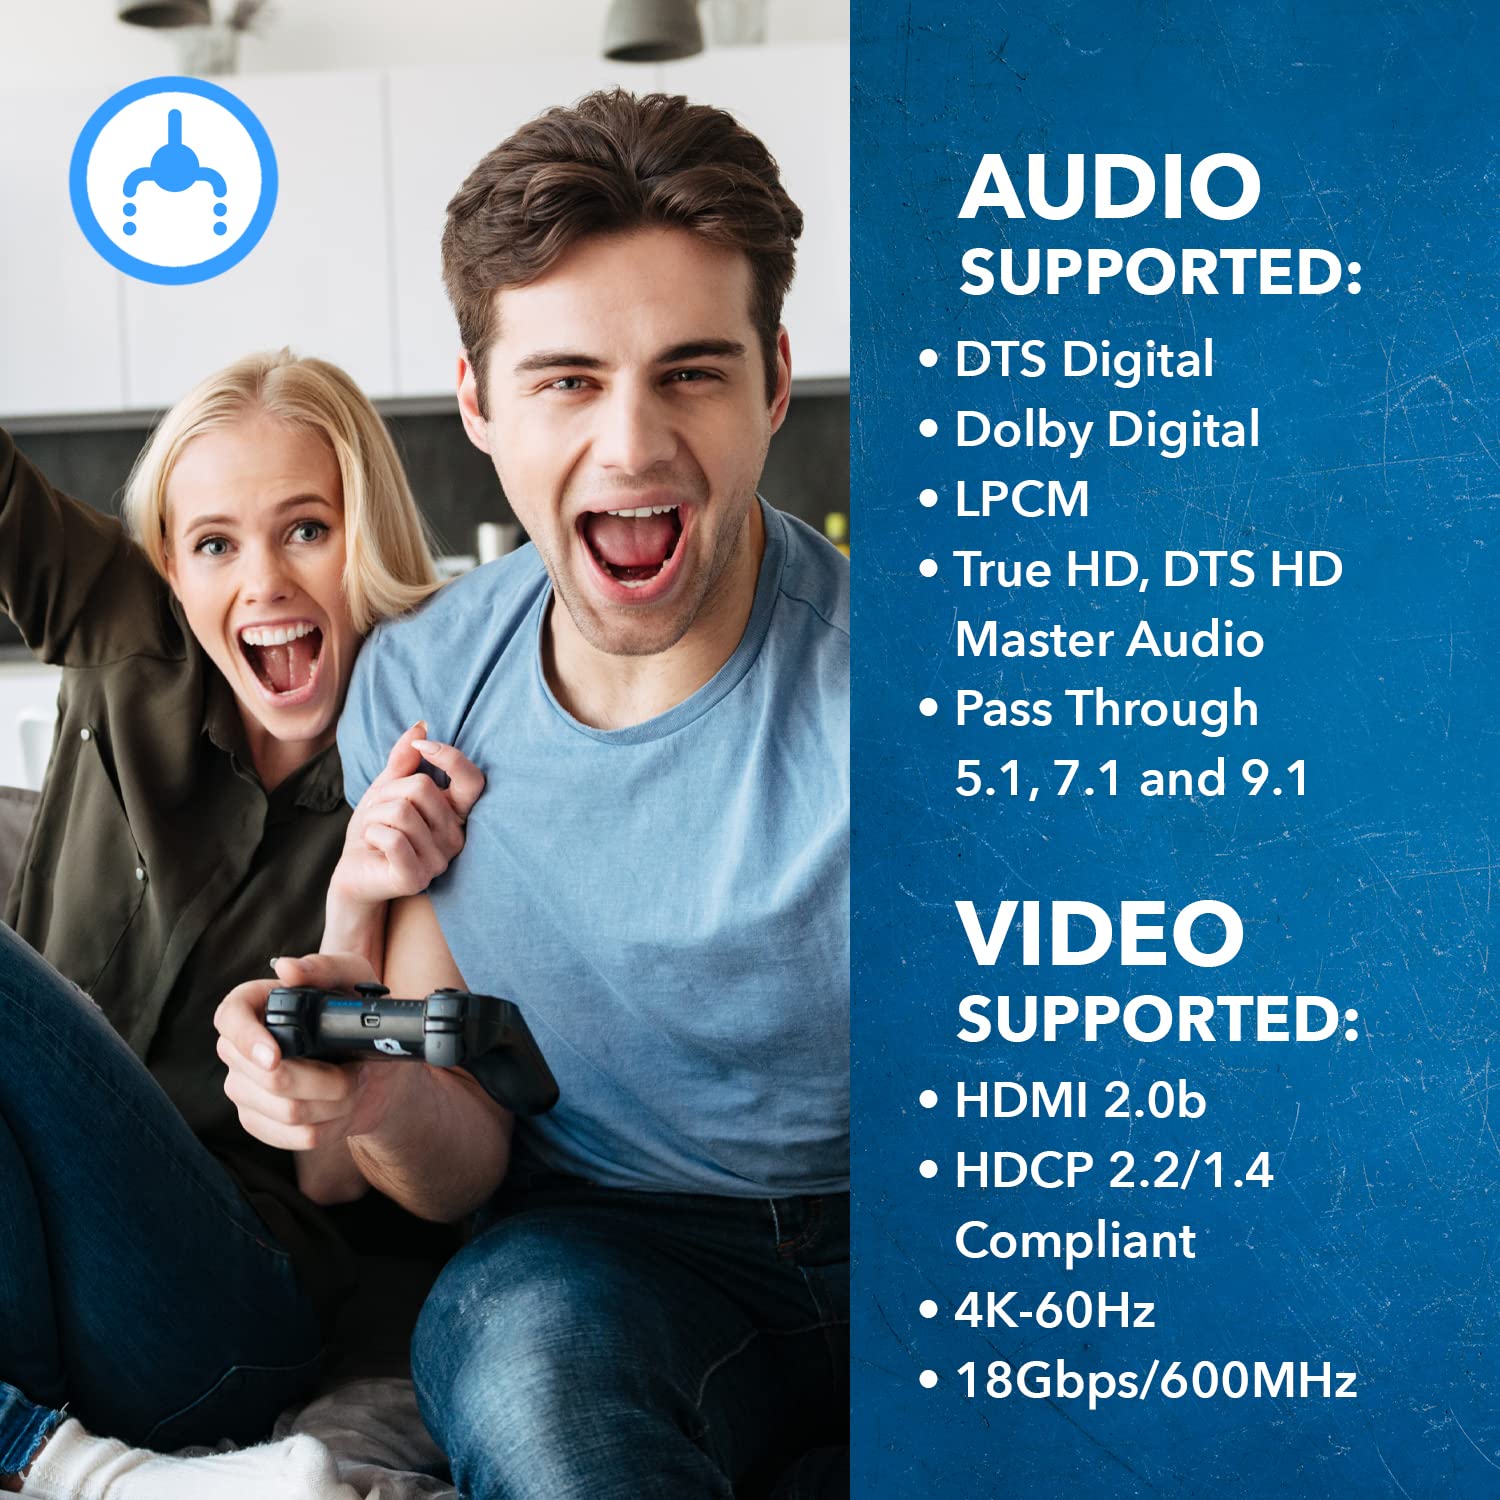 OREI Ultra HD HDMI 4 x 1 Switcher 18G Audio Extractor IR Remote - Supports Upto 4K @ 60Hz - (4 Input, 1 Output) Switch, Hub, Port for Cable, HD TV, Laptop, MacBook & More (UHD-401)